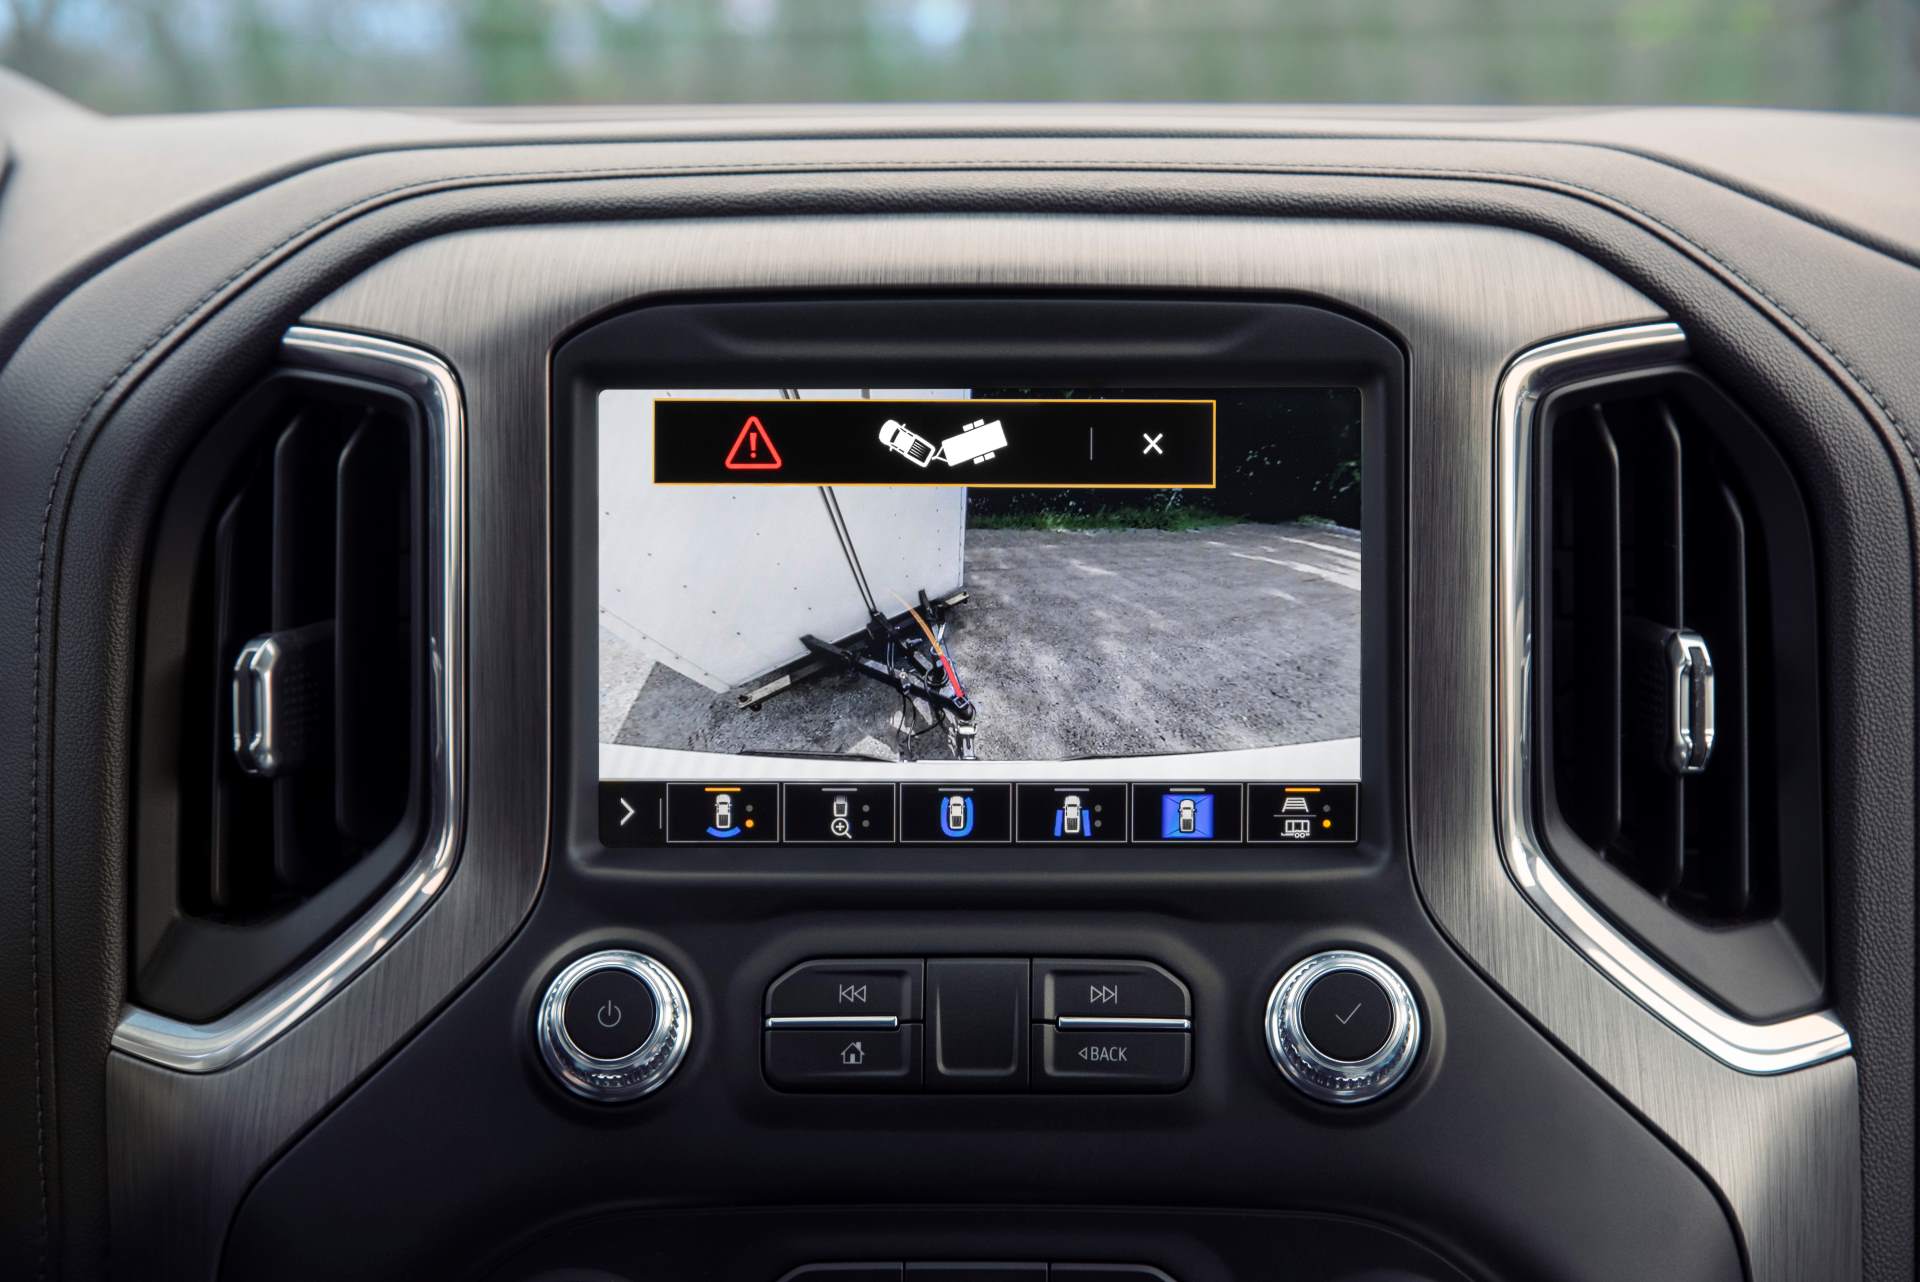 GMC Sierra 1500's infotainment system engaged in monitoring a trailer behind the vehicle, displaying a warning